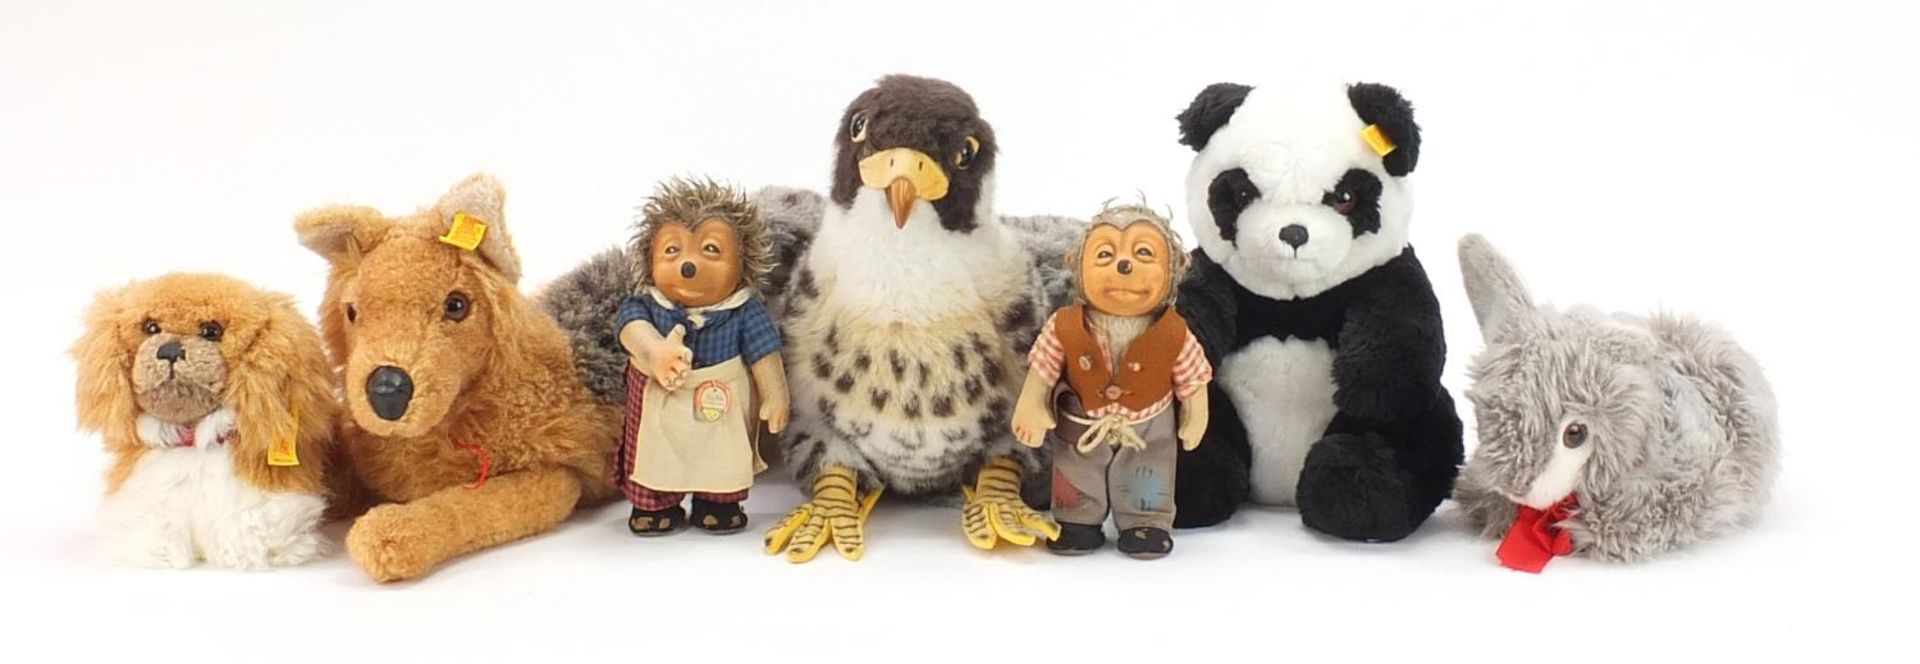 Vintage and later Steiff bears and animals including Micki the Hedgehog and Panda, the largest